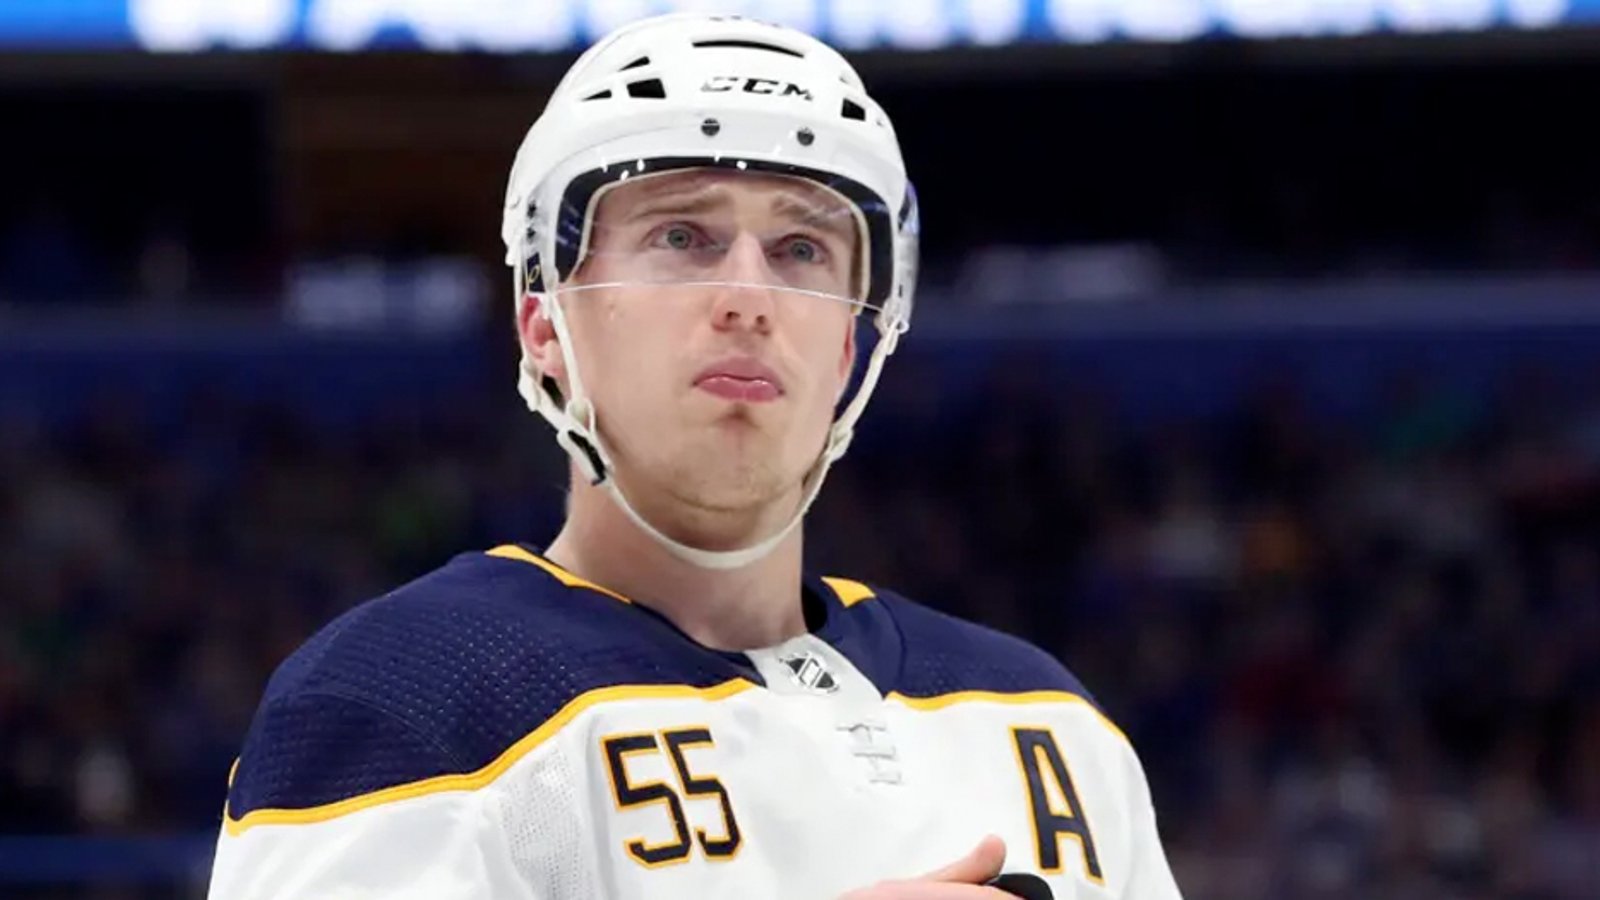 Ristolainen follows Eichel's lead, dumps on Sabres and talks about being traded